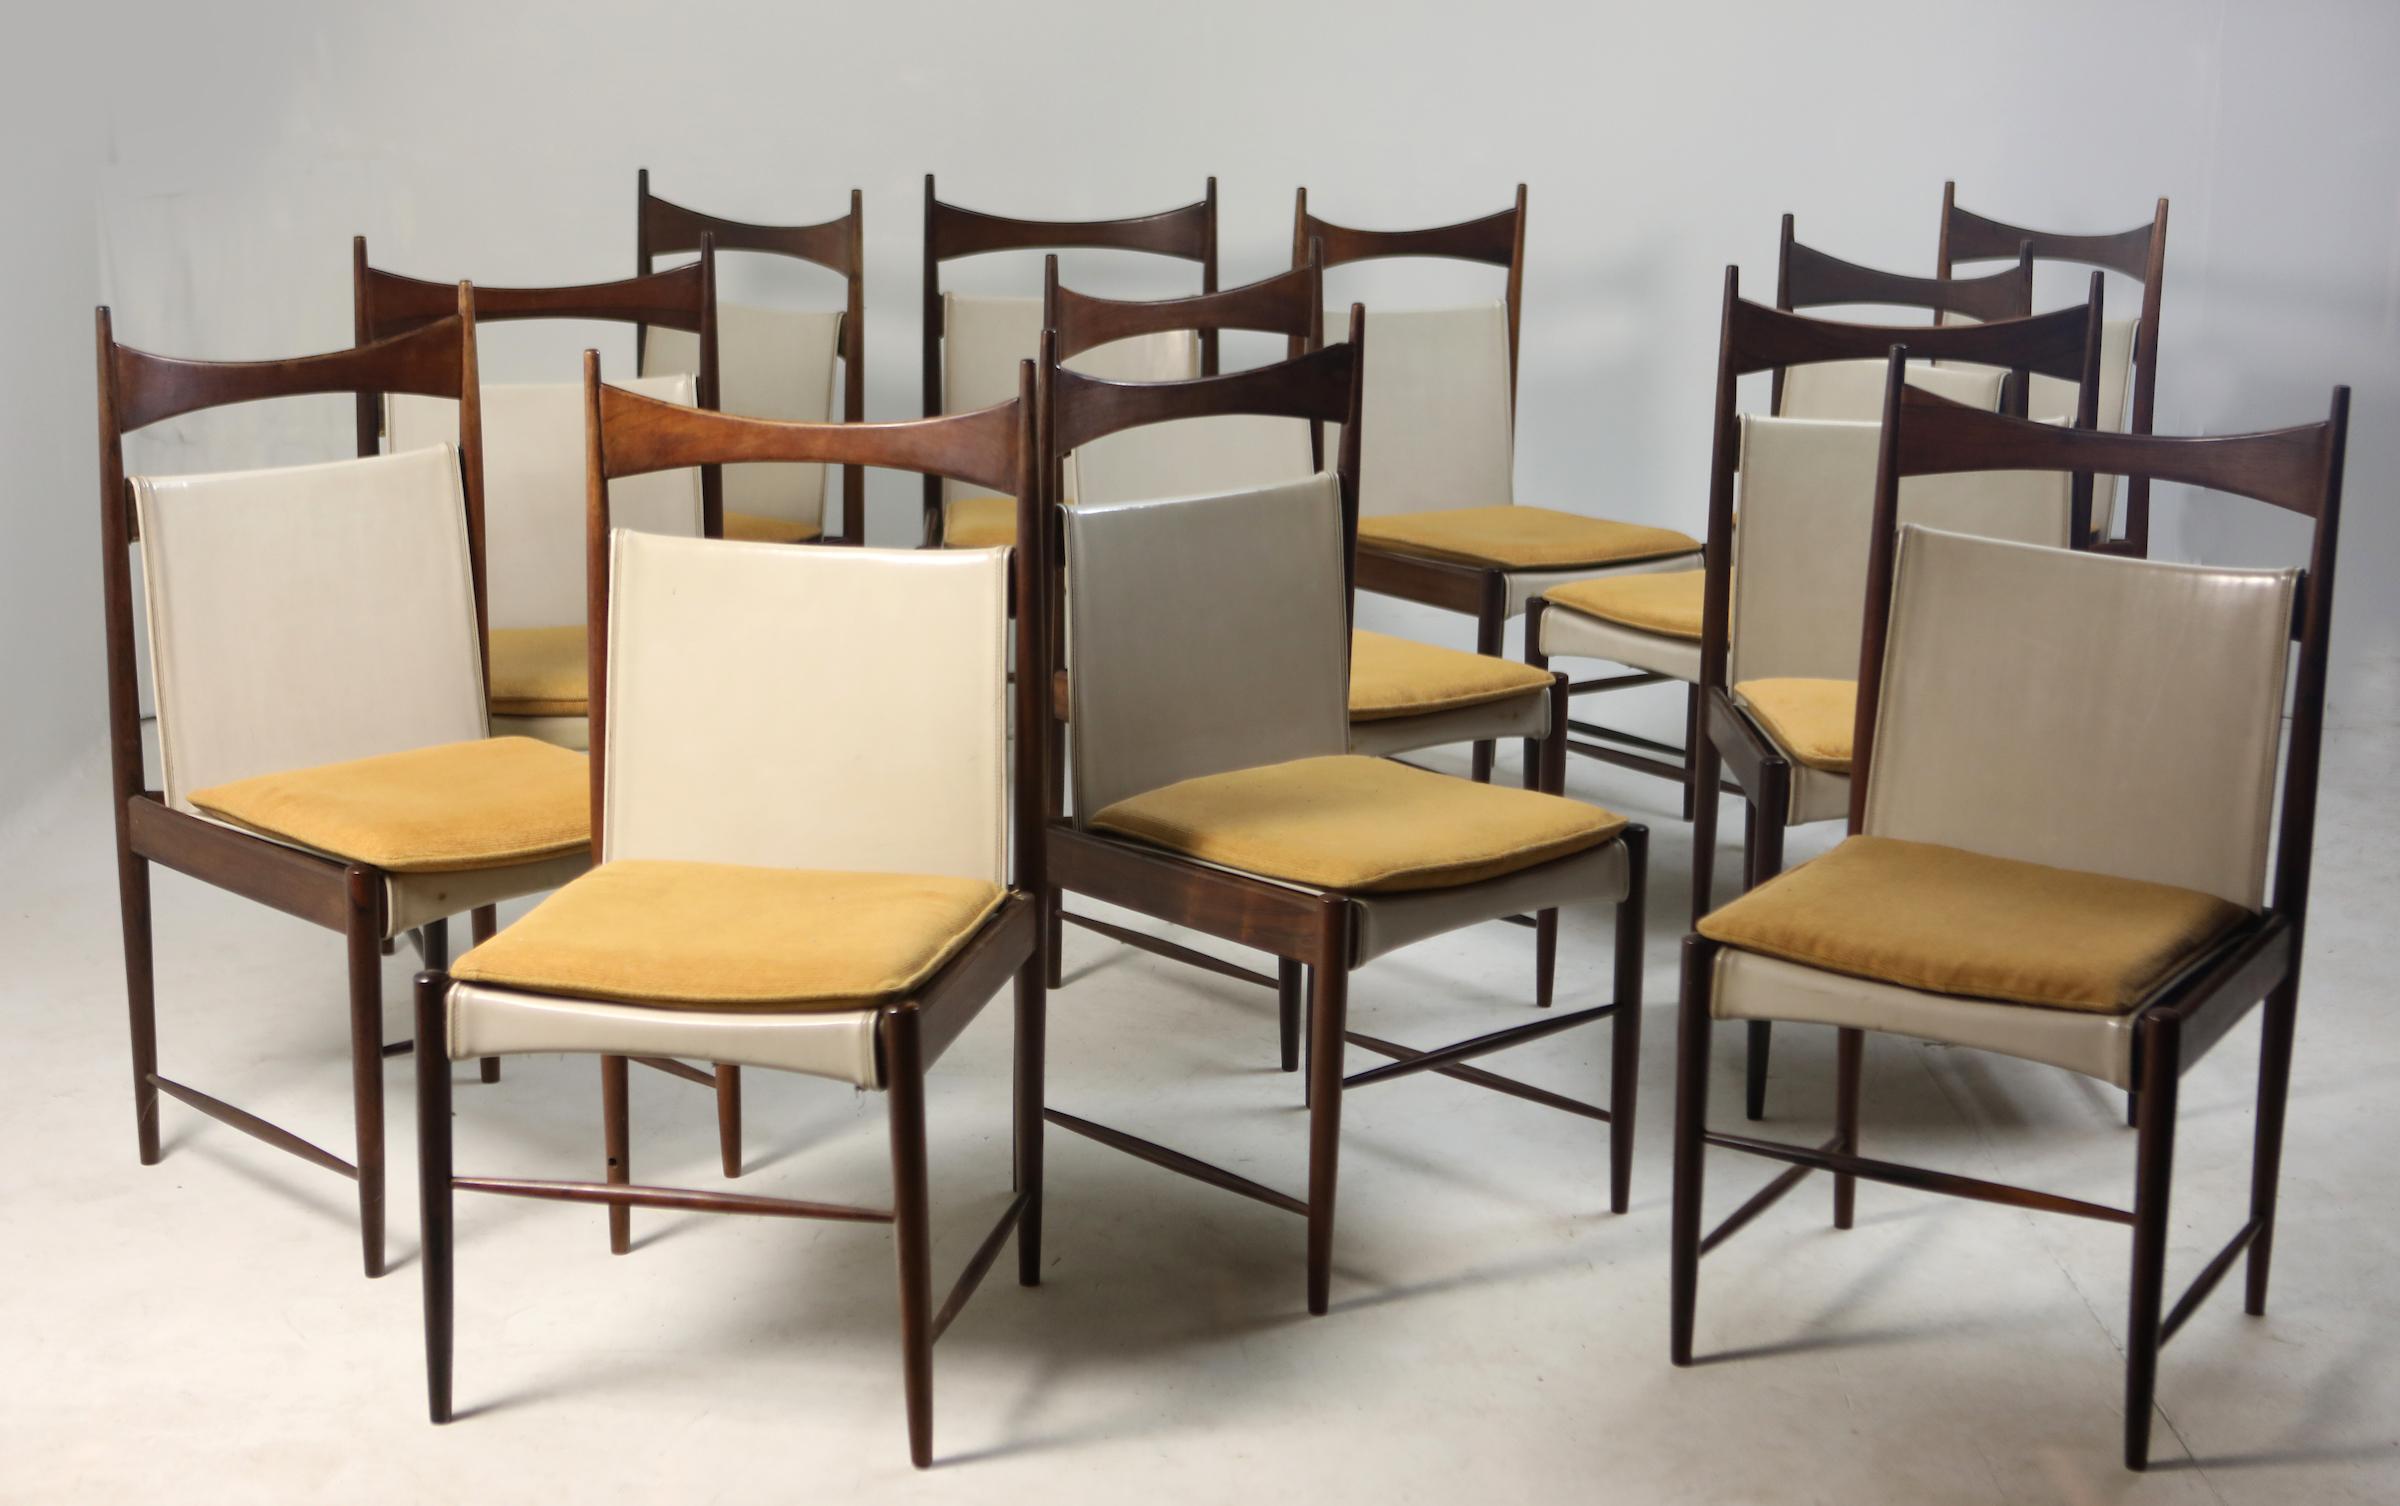 Brazilian Mid-Century Modern Set of Dining Table with Chairs by Sergio Rodrigues, Brazil